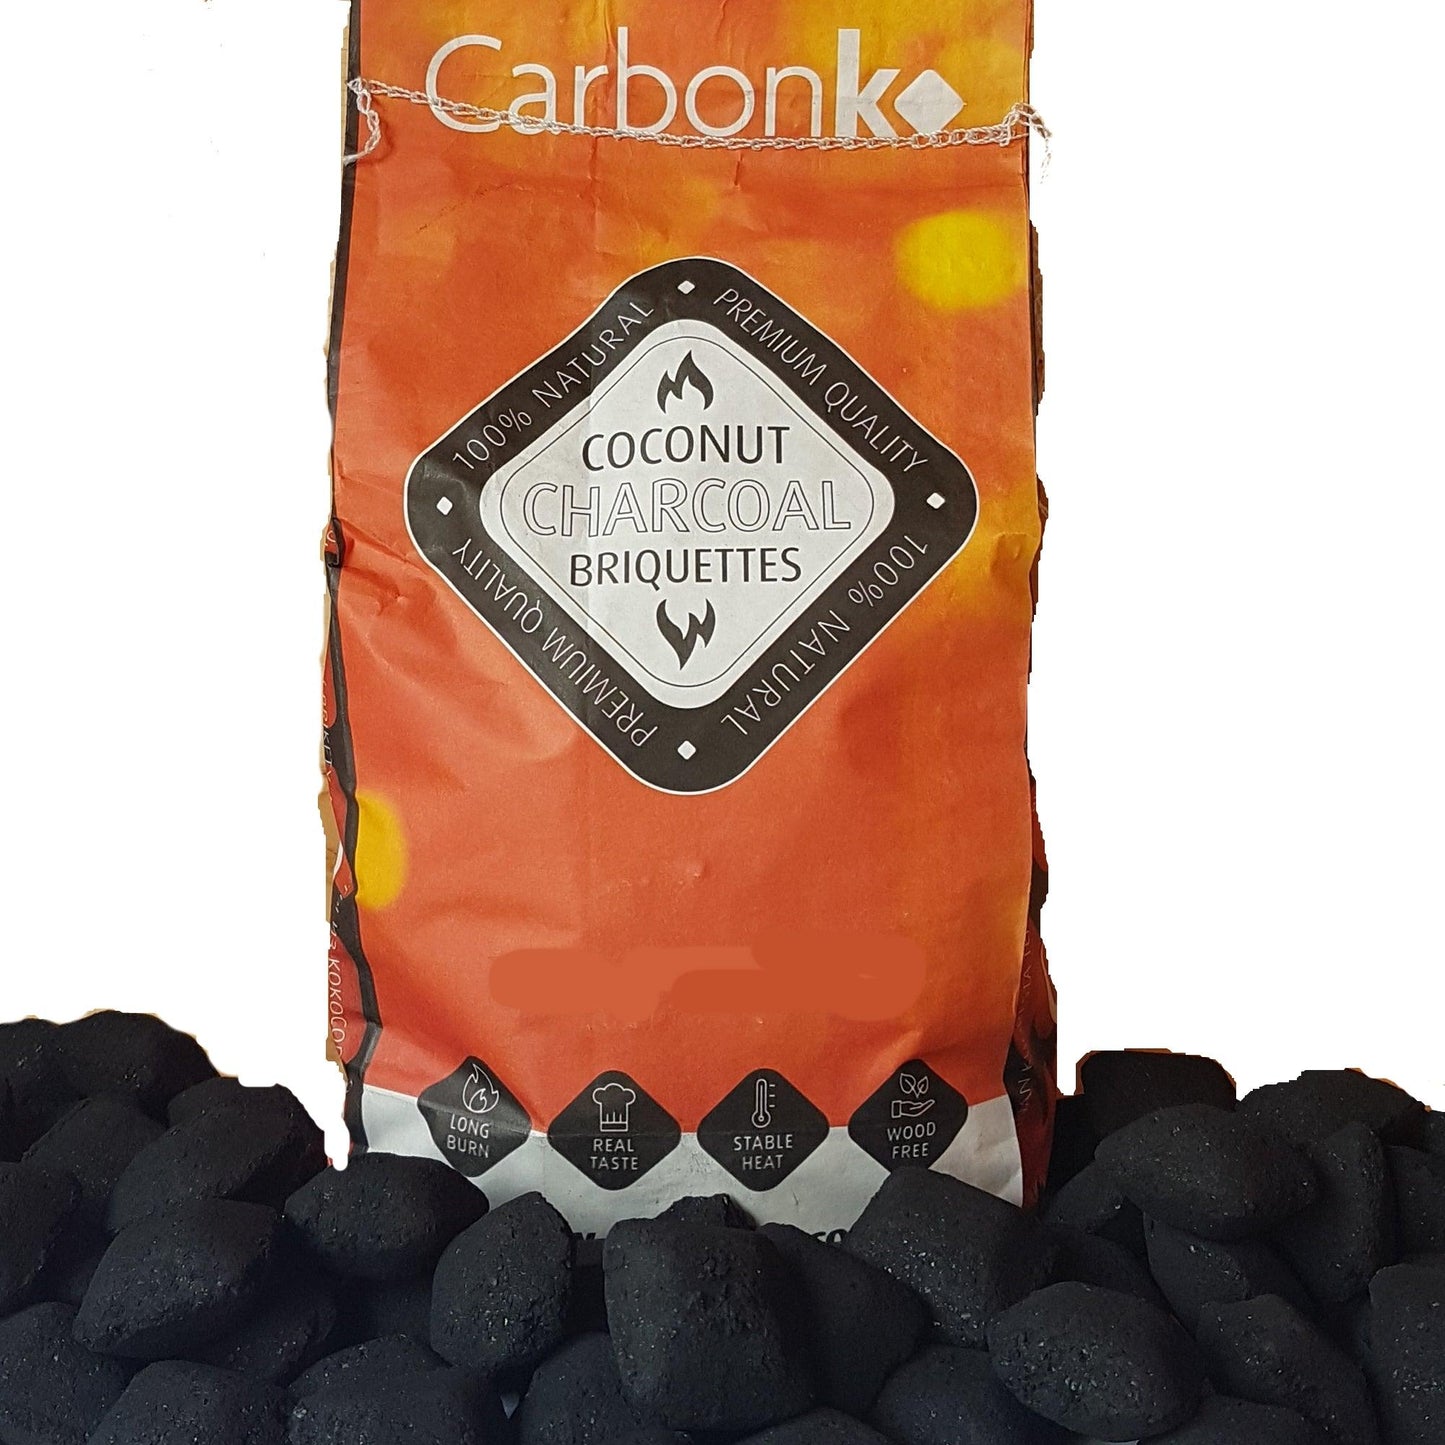 12kg Coconut Shell Charcoal Briquettes by Carbonko - BBQ Land